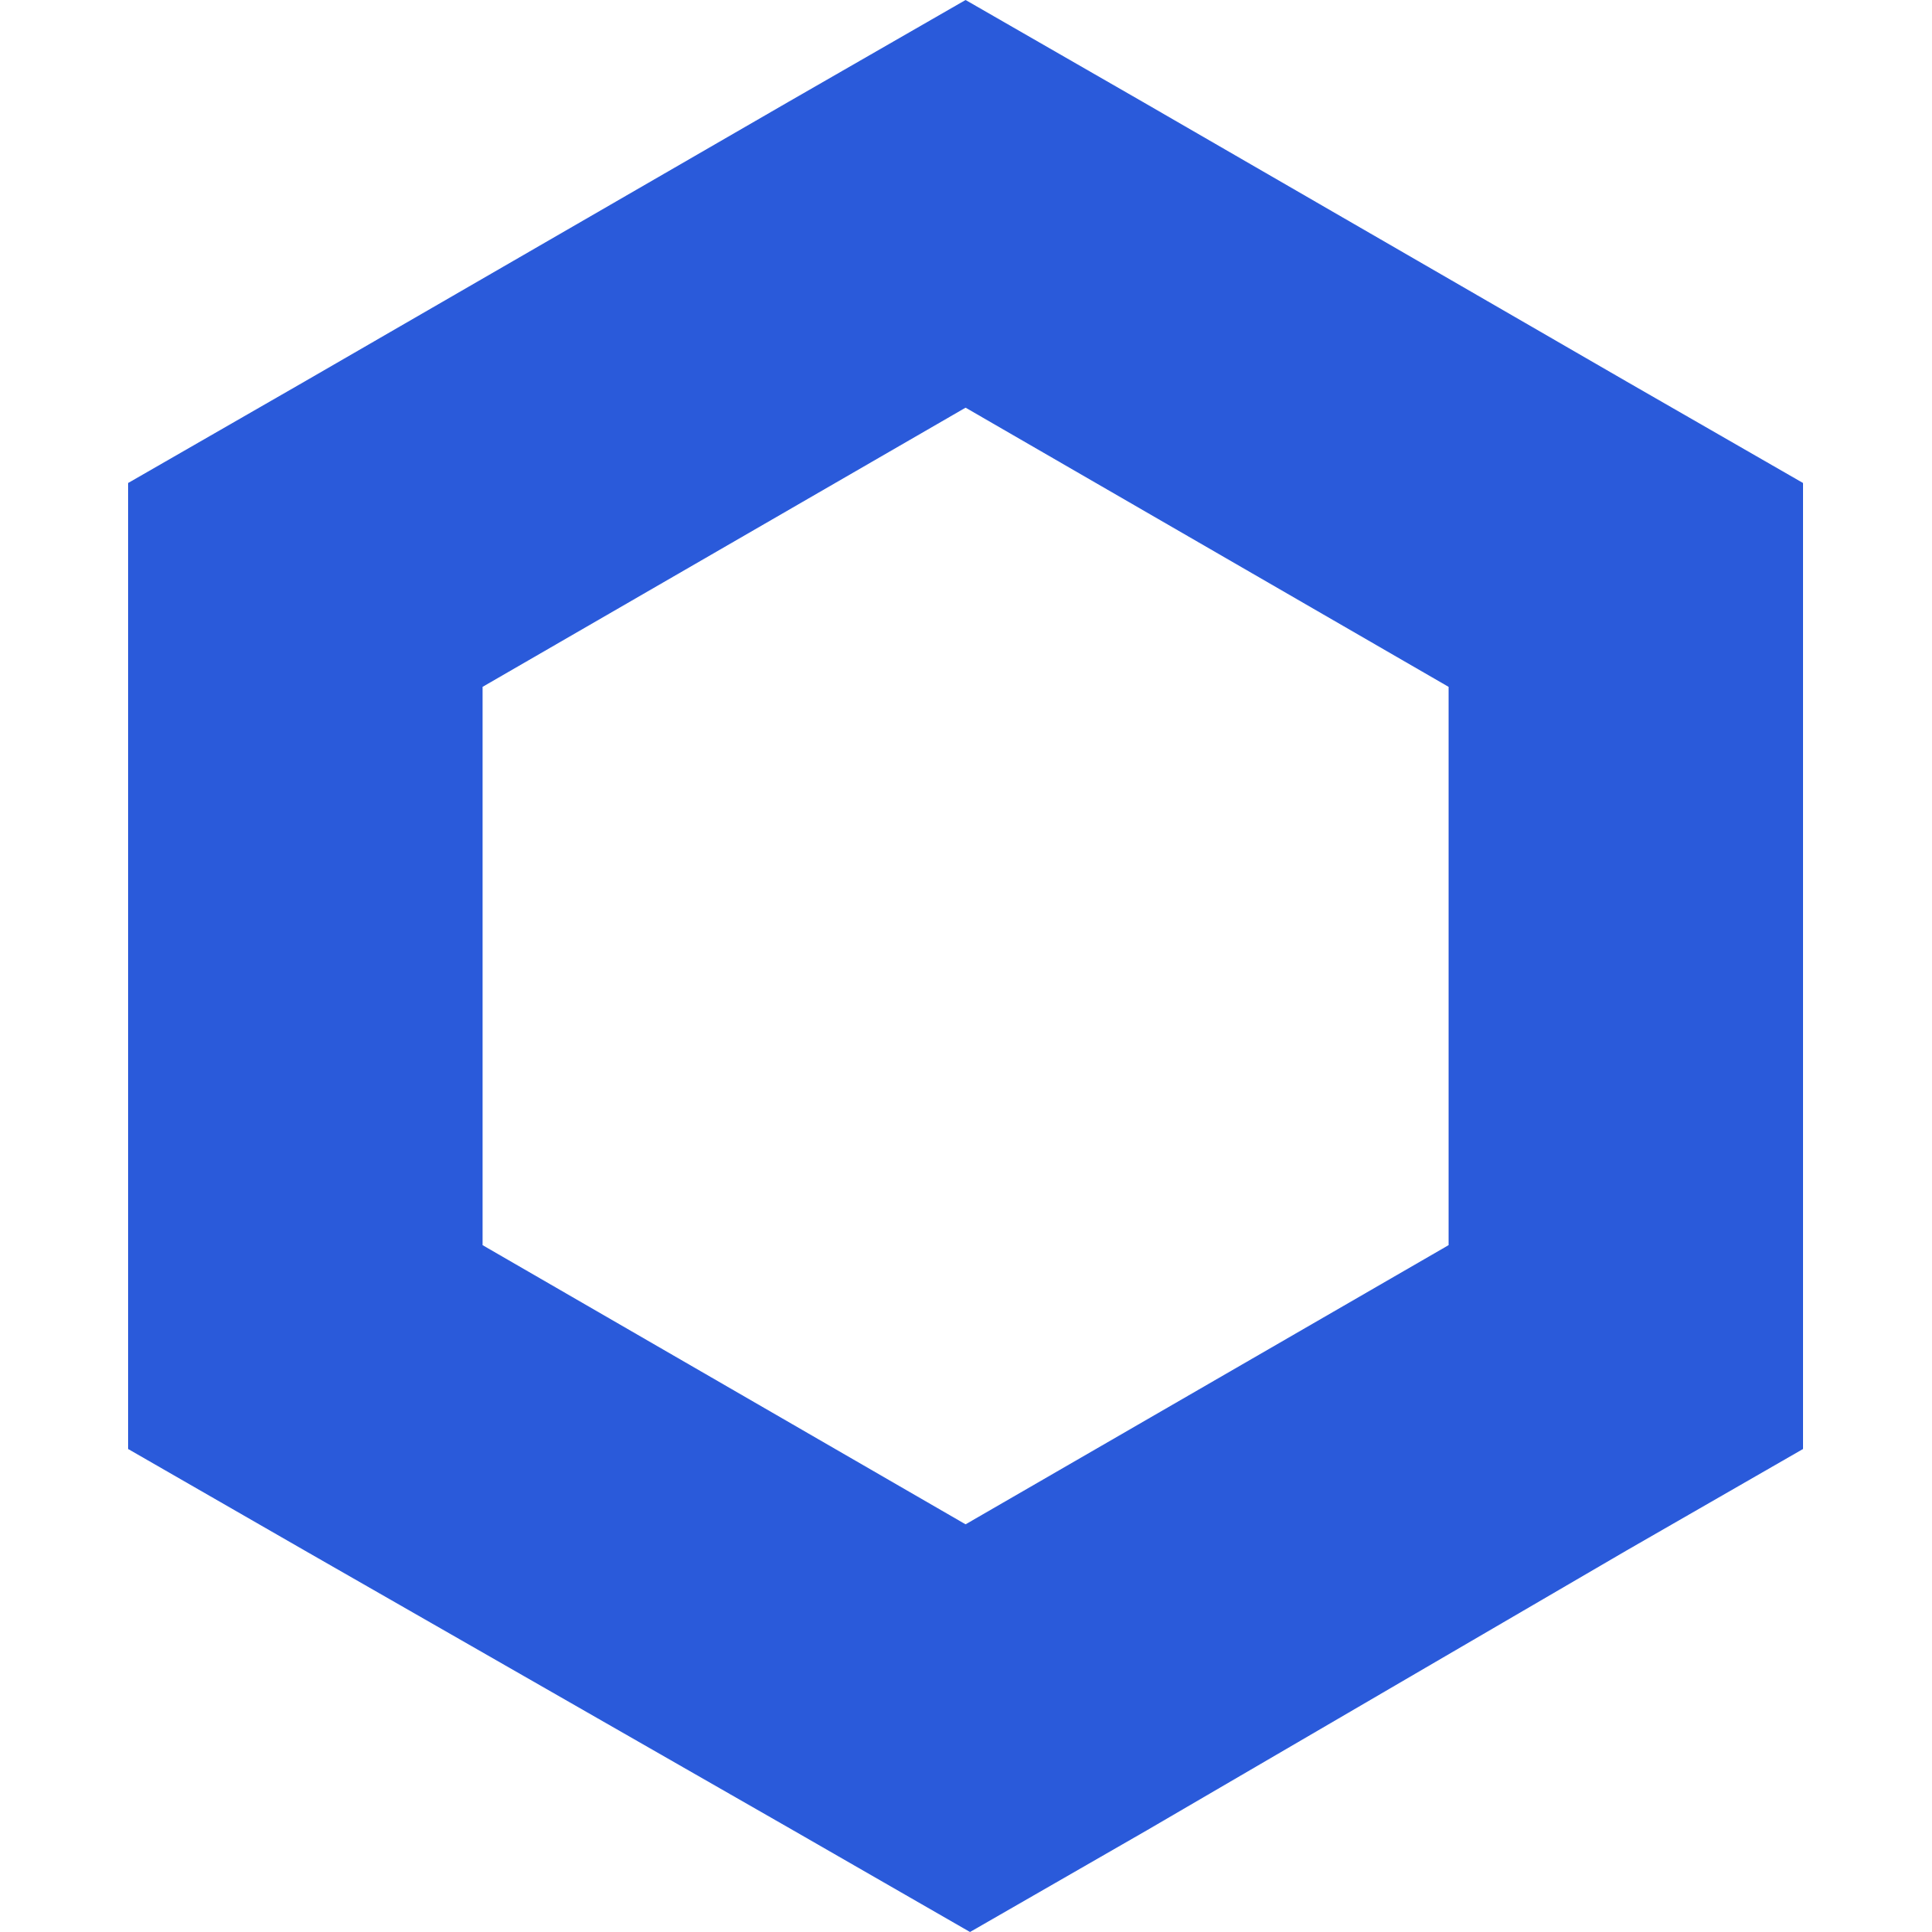 An image of the Chainlink logo.